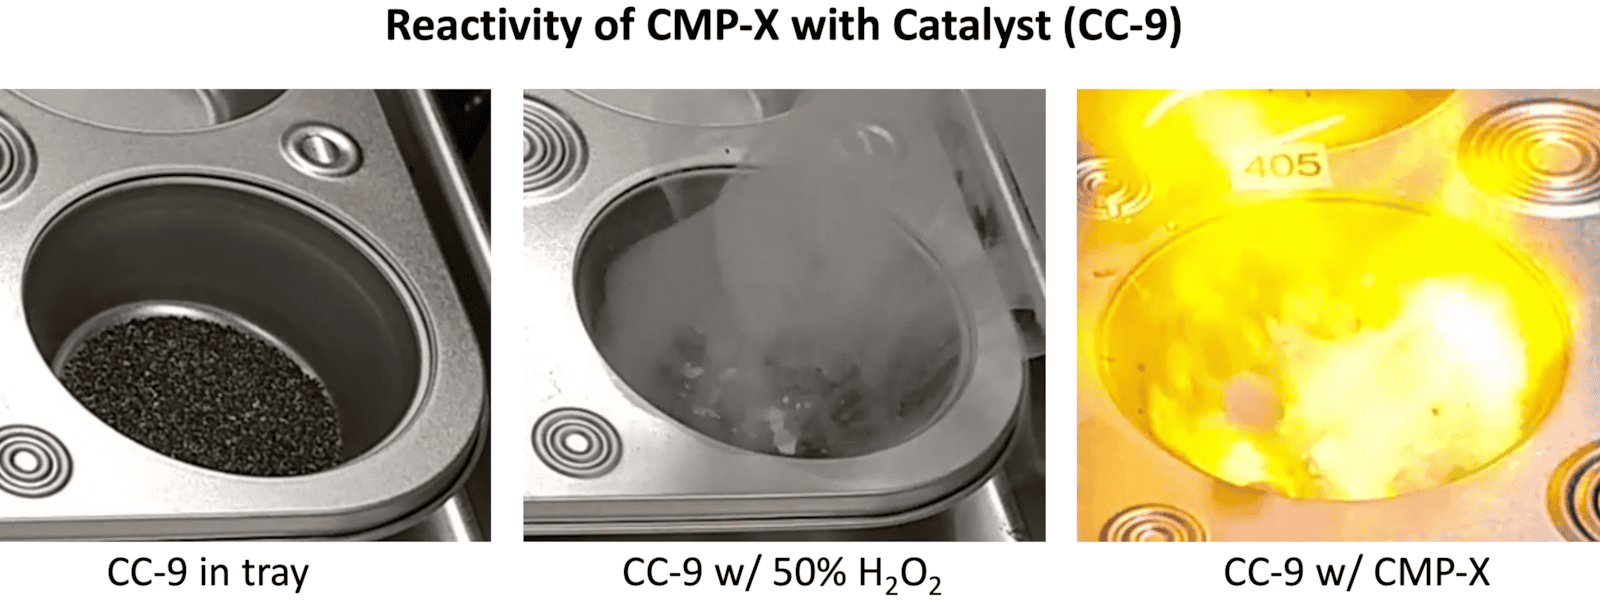 Reactivity of CMP-X with Catalyst (CC-9)